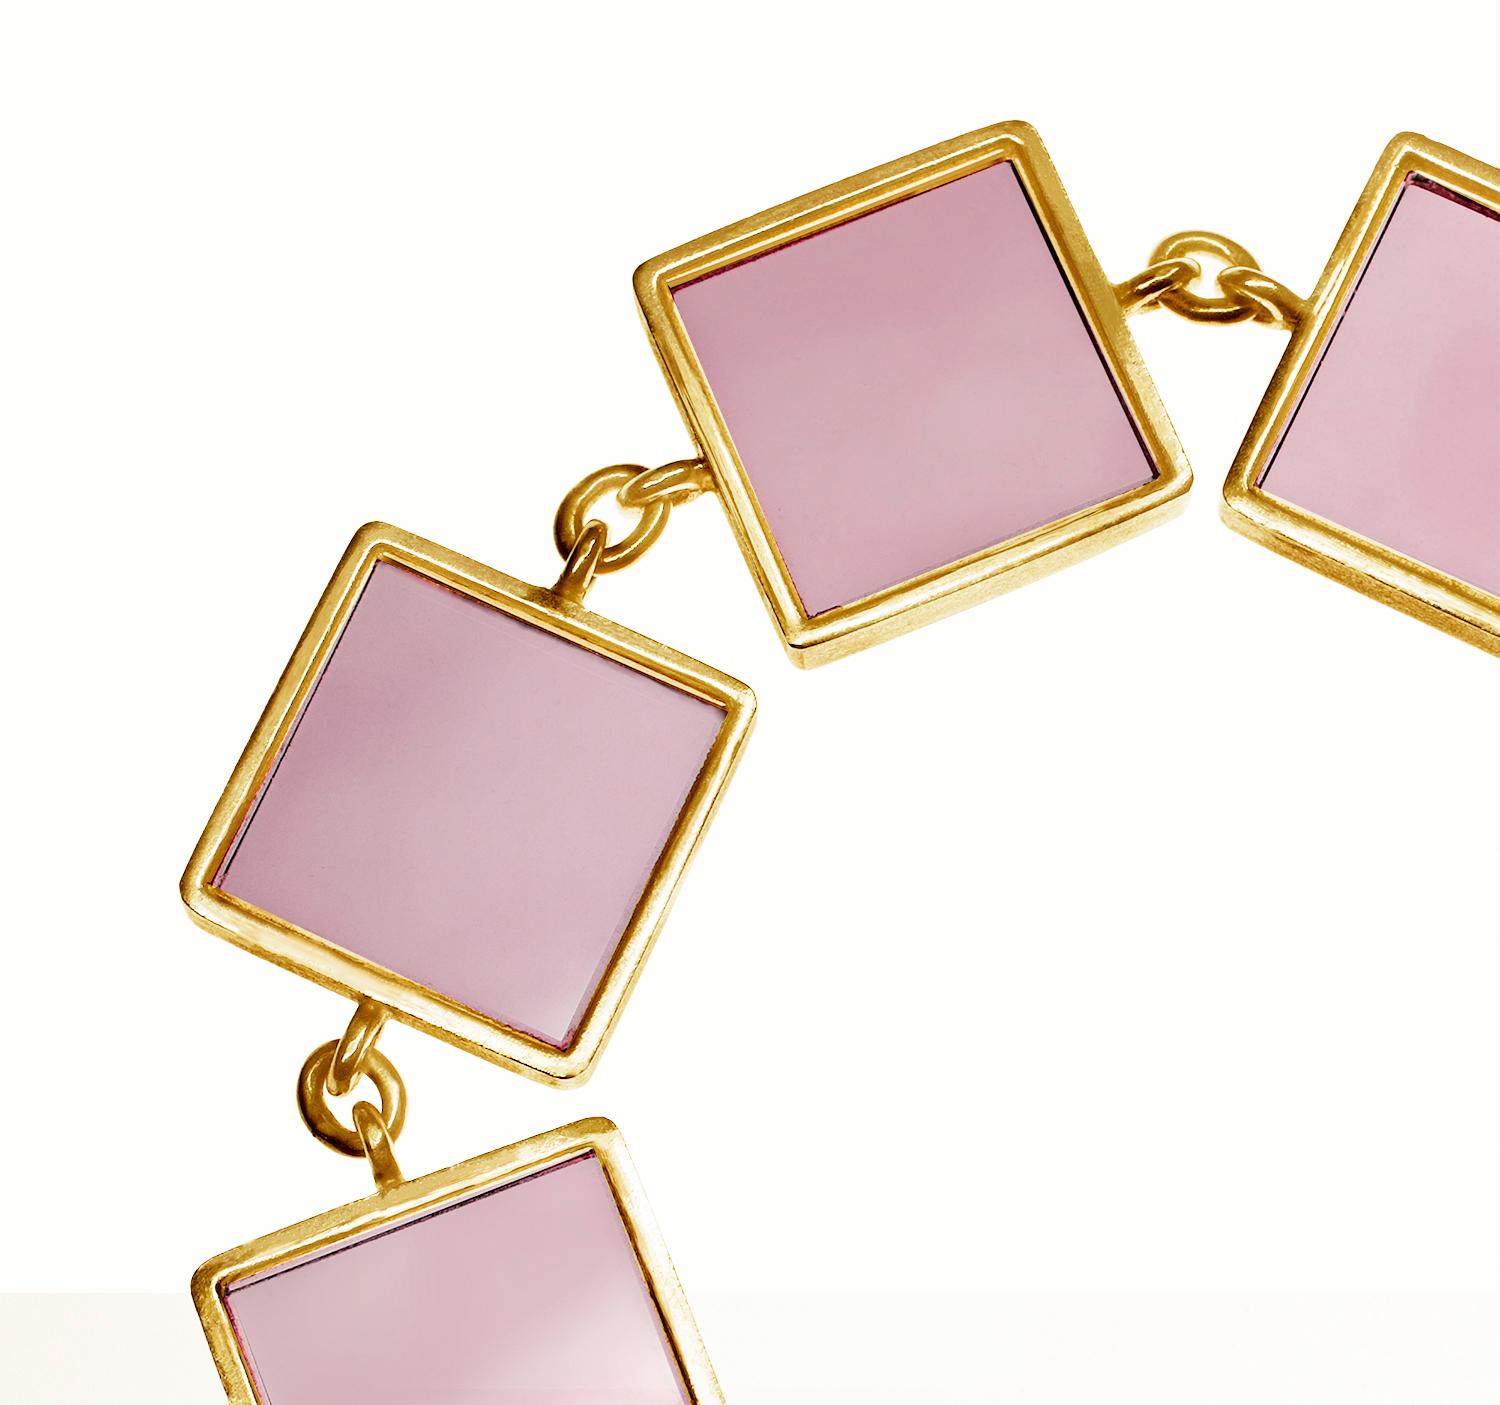 This designer jewelry bracelet features seven 15x15x3 mm rose onyxes set in 14 karat yellow gold. The Ink collection was featured in Harper's Bazaar UA and Vogue UA published issues.

The bracelet shines gently due to the gold and the natural rose